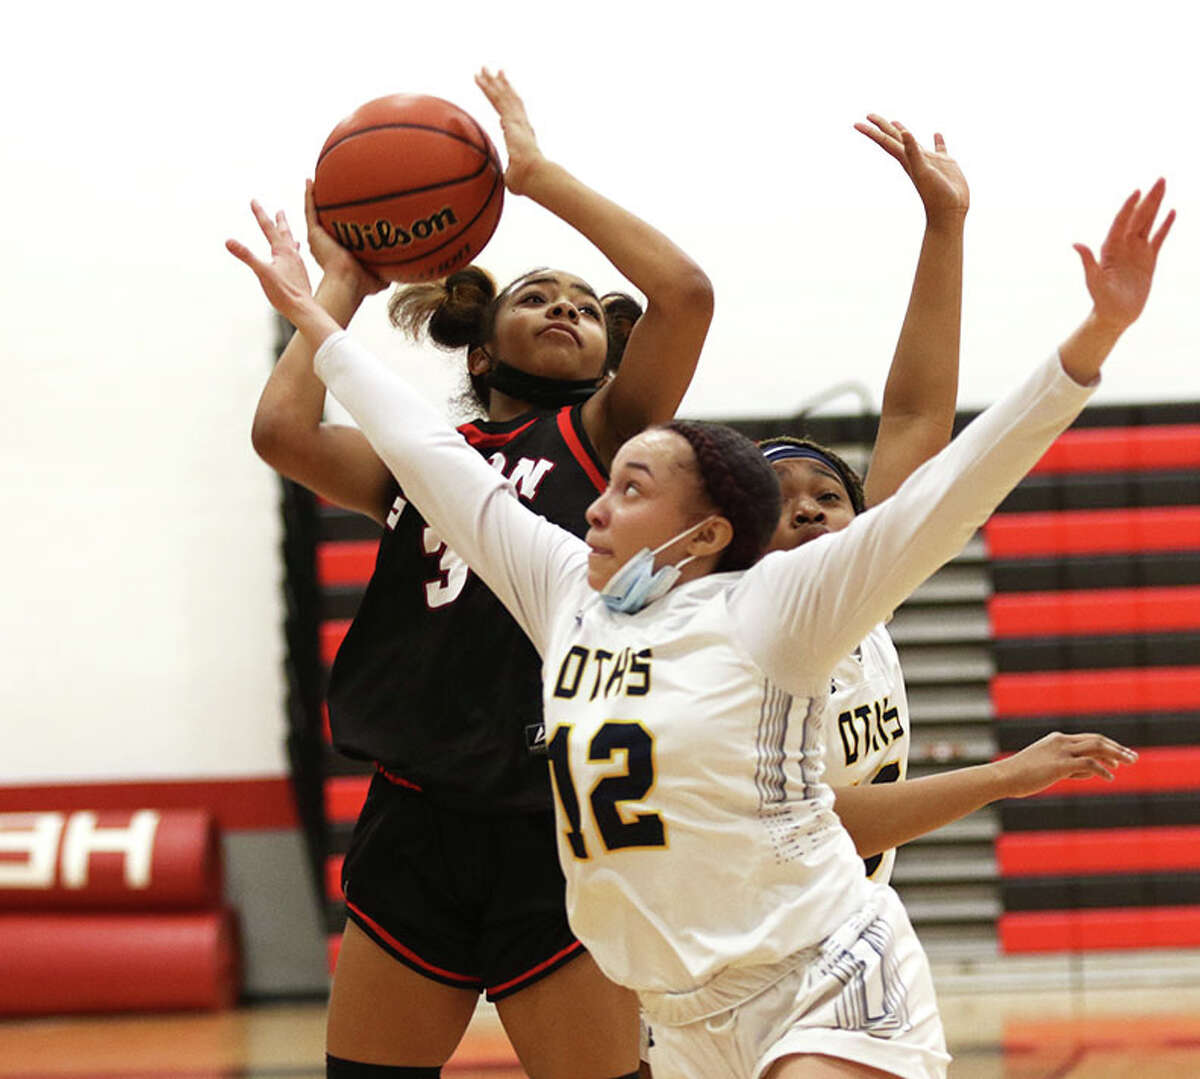 Alton's Kiyoko Proctor shoots over O'Fallon's Laylah Jackson (12) in the second of Saturday's third-place game at the Highland ApexNetwork Tournament.